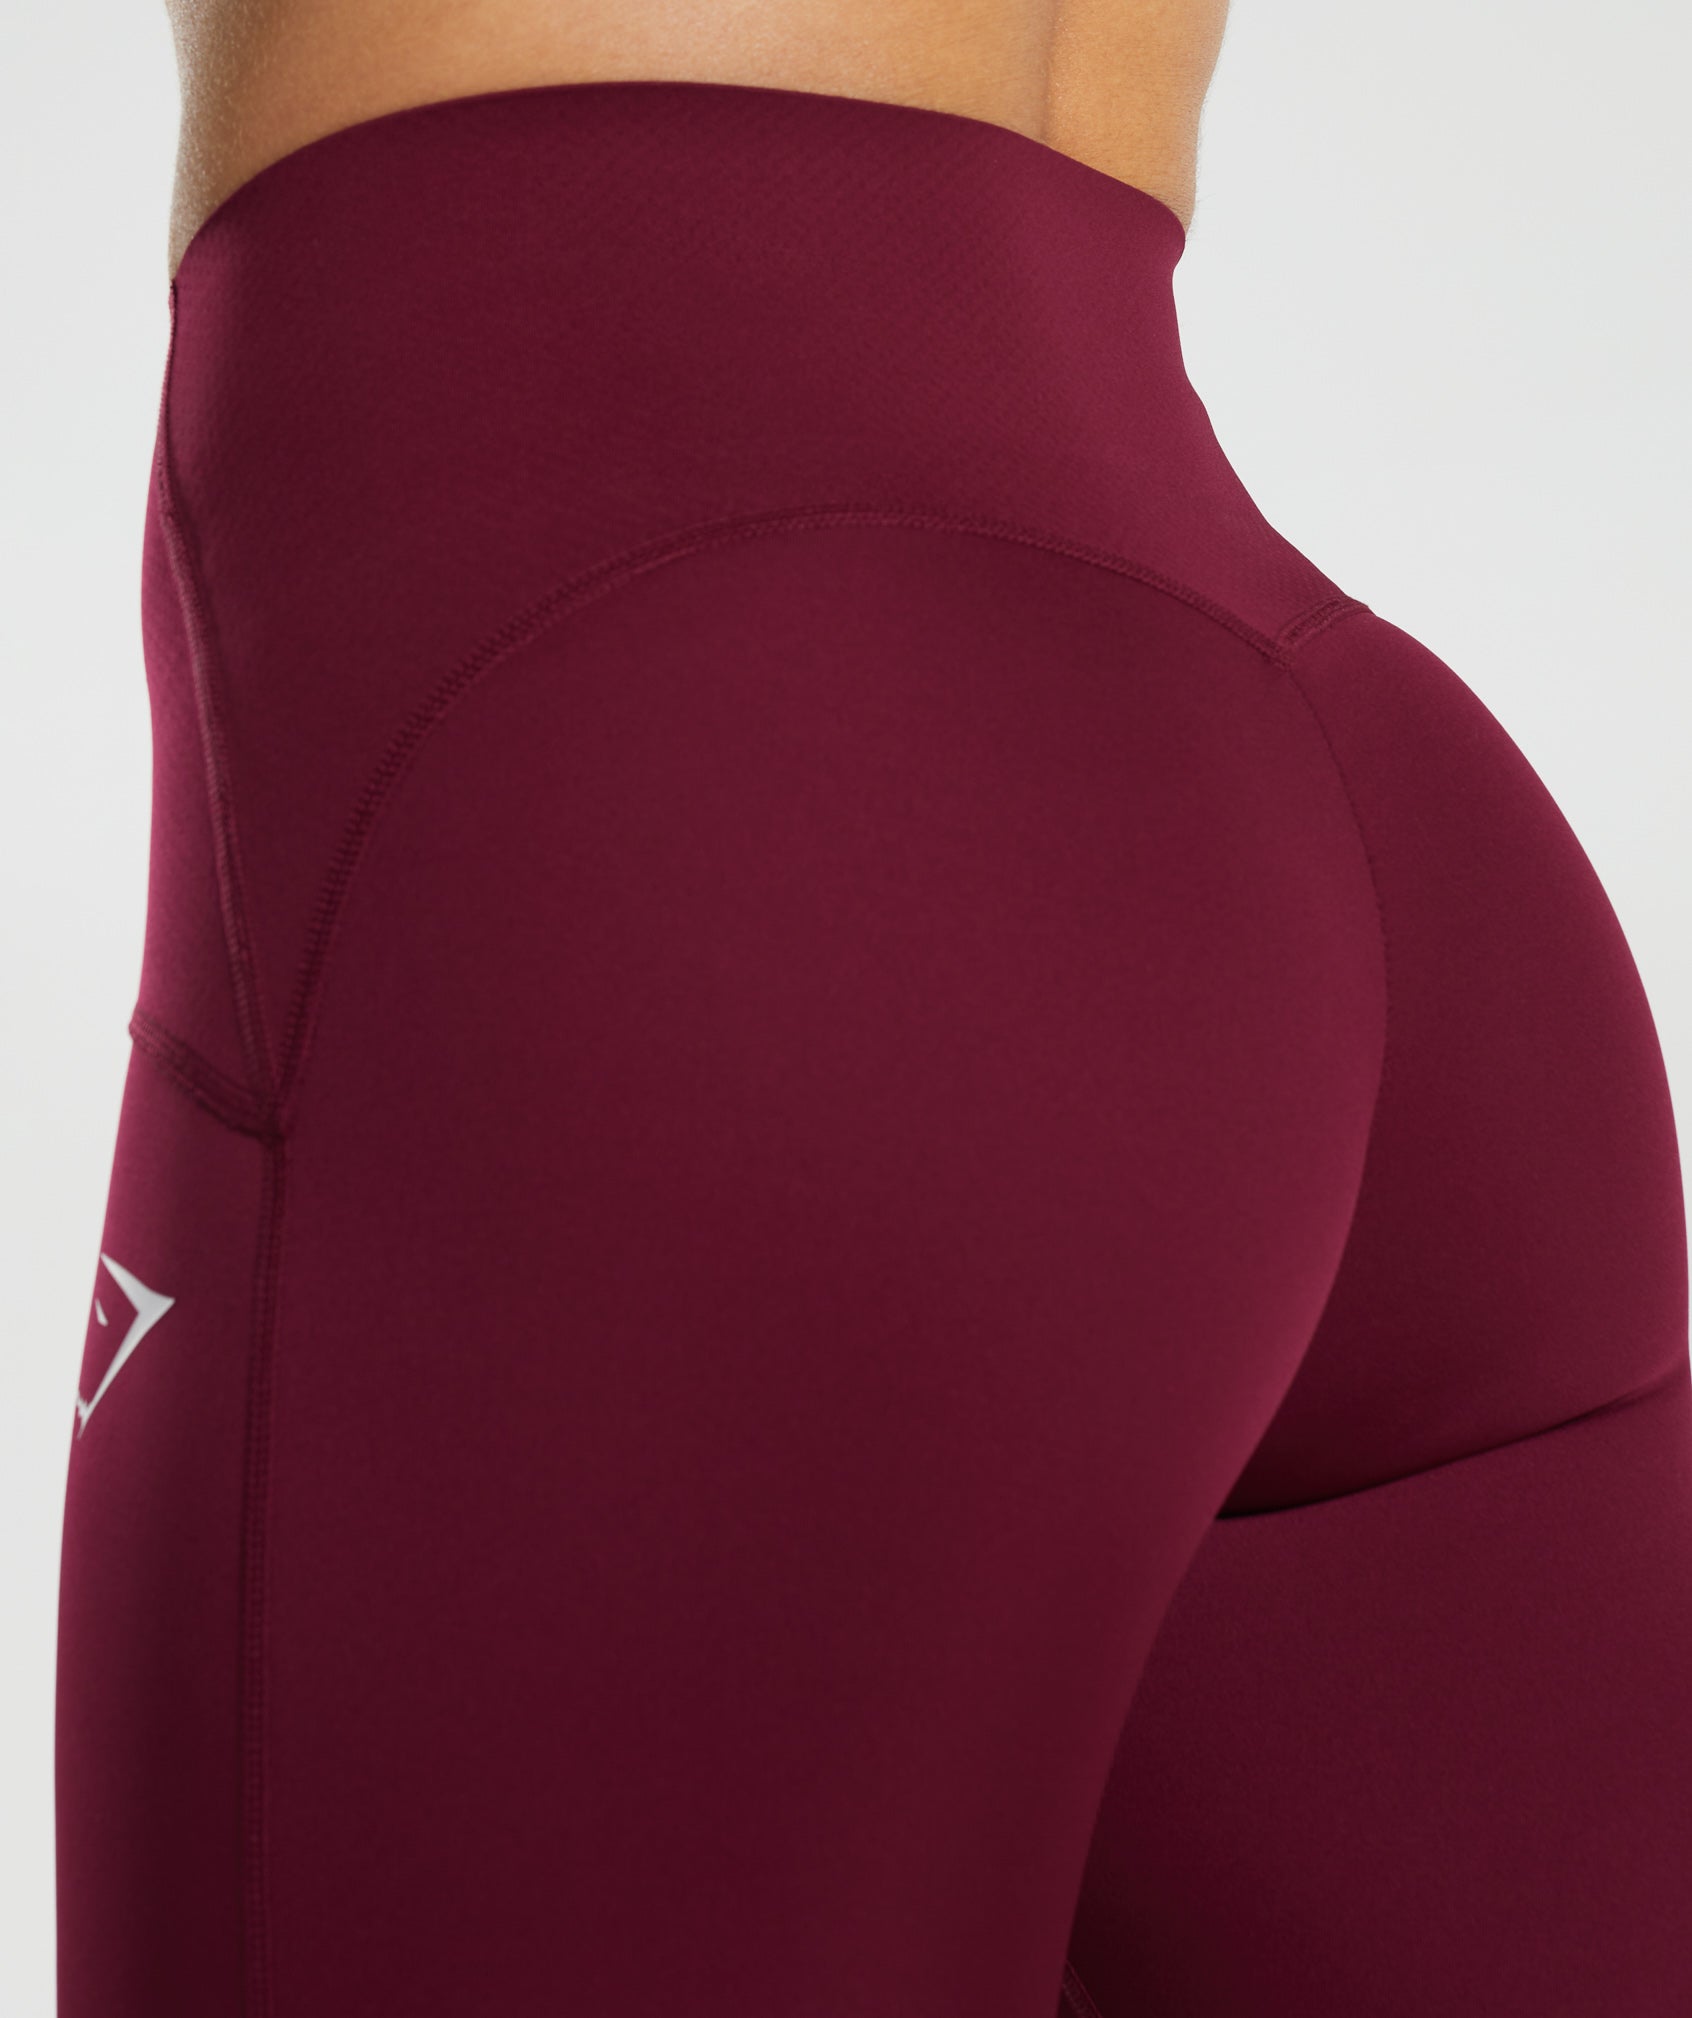 Waist Support Leggings in Plum Pink - view 3